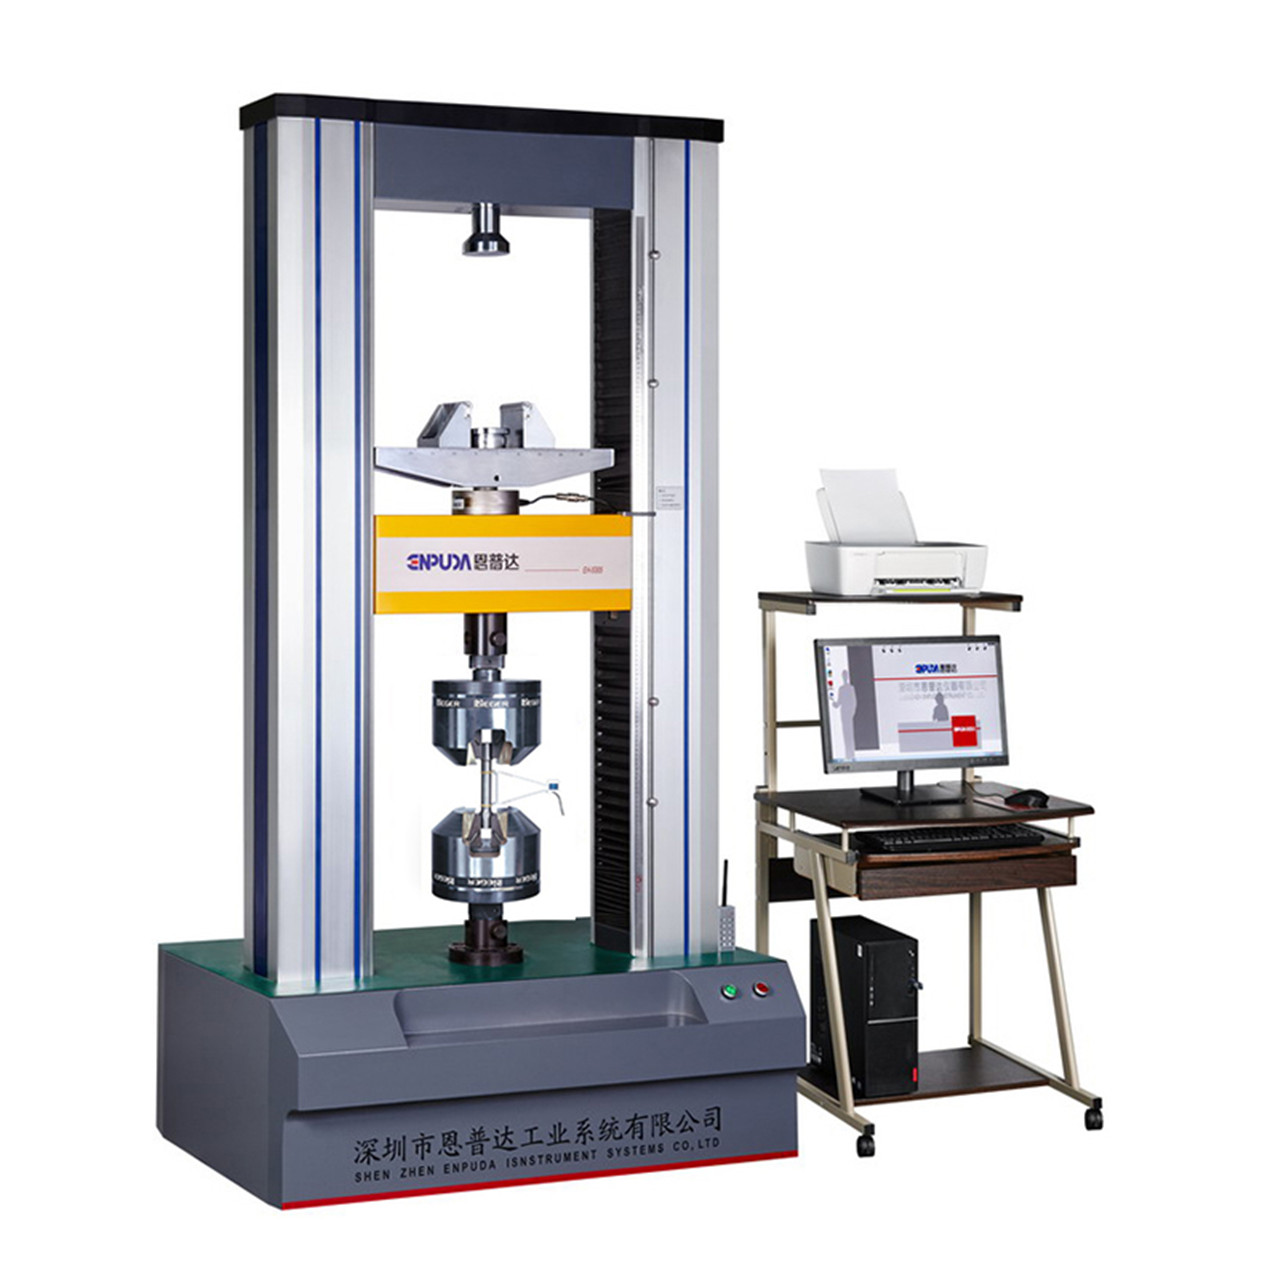 https://www.epd-instrument.com/high-and-low-temperature-electronic-universal-testing-machine-product/